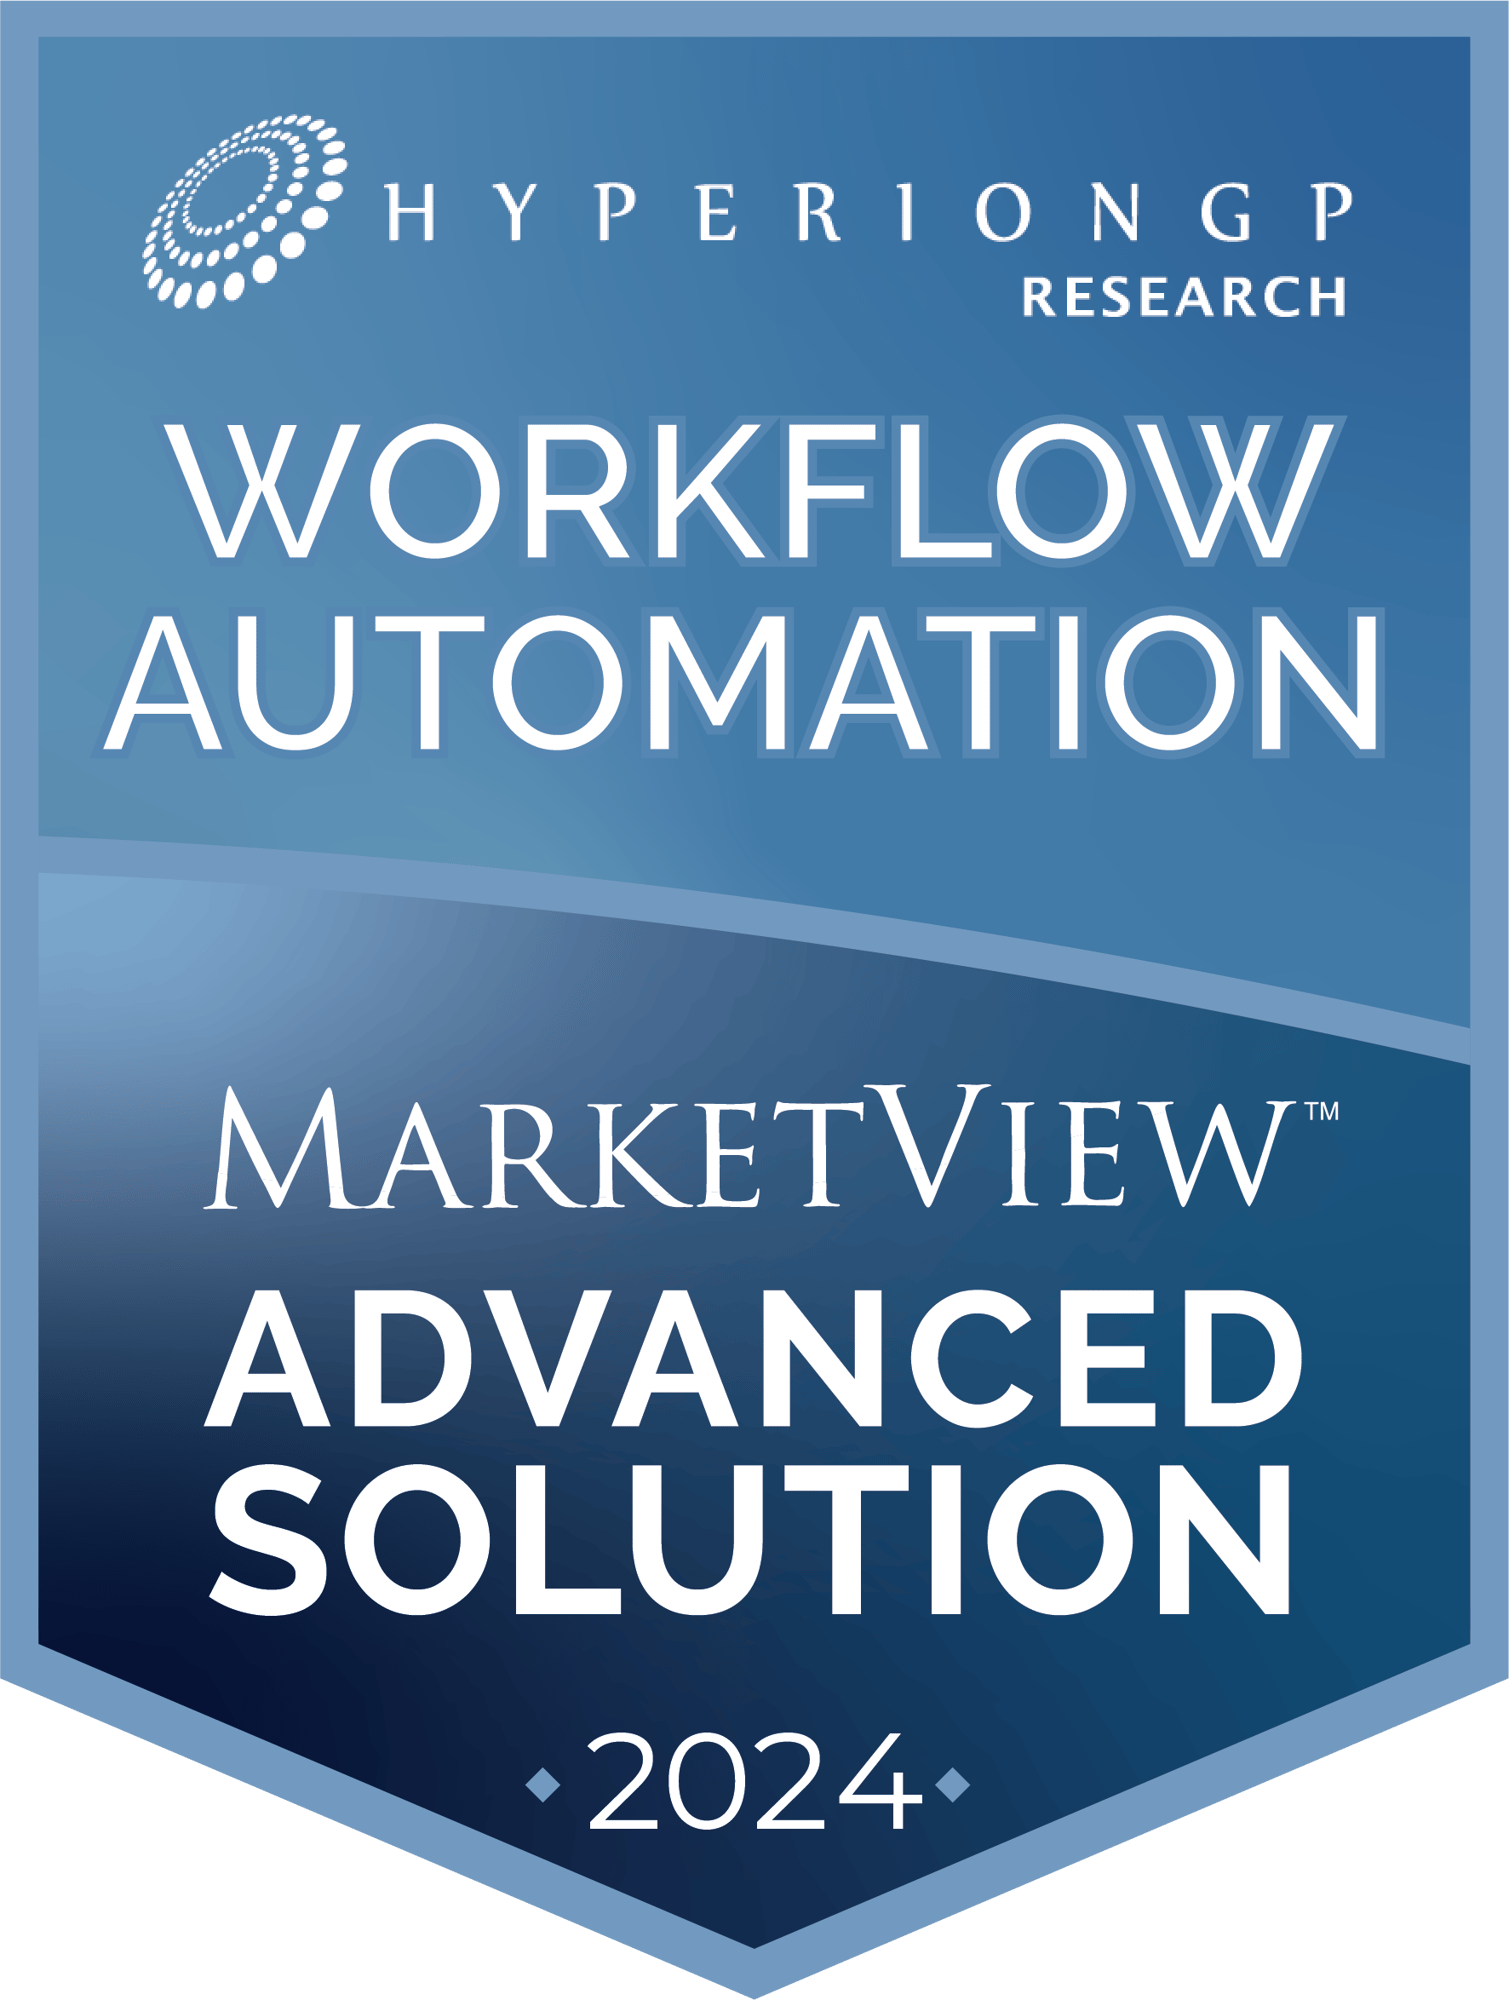 MarketView WorkFlow Automation Badges